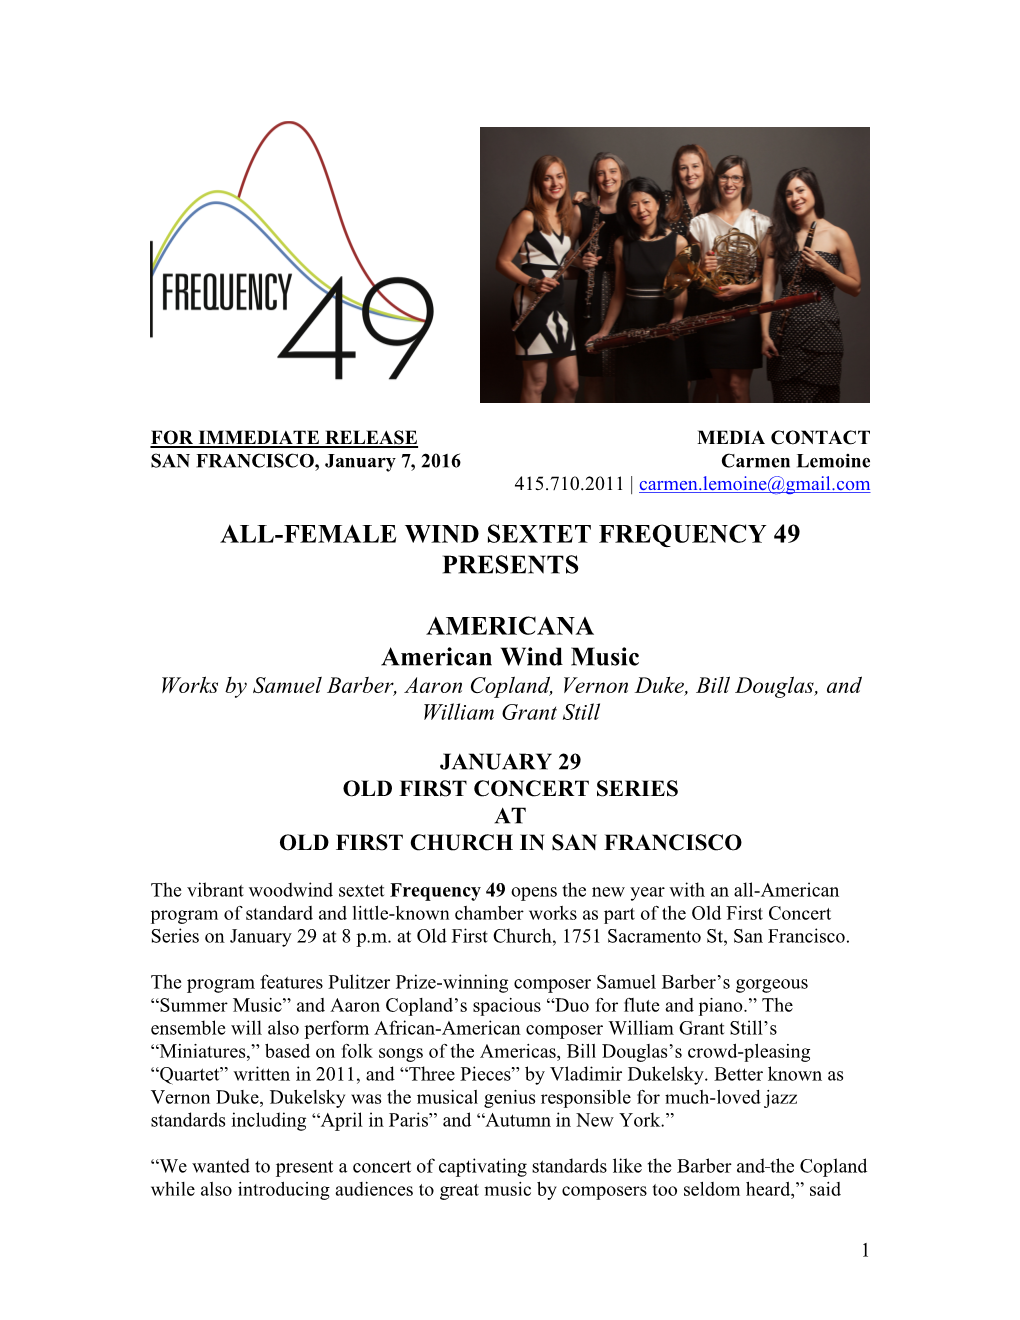 All-Female Wind Sextet Frequency 49 Presents